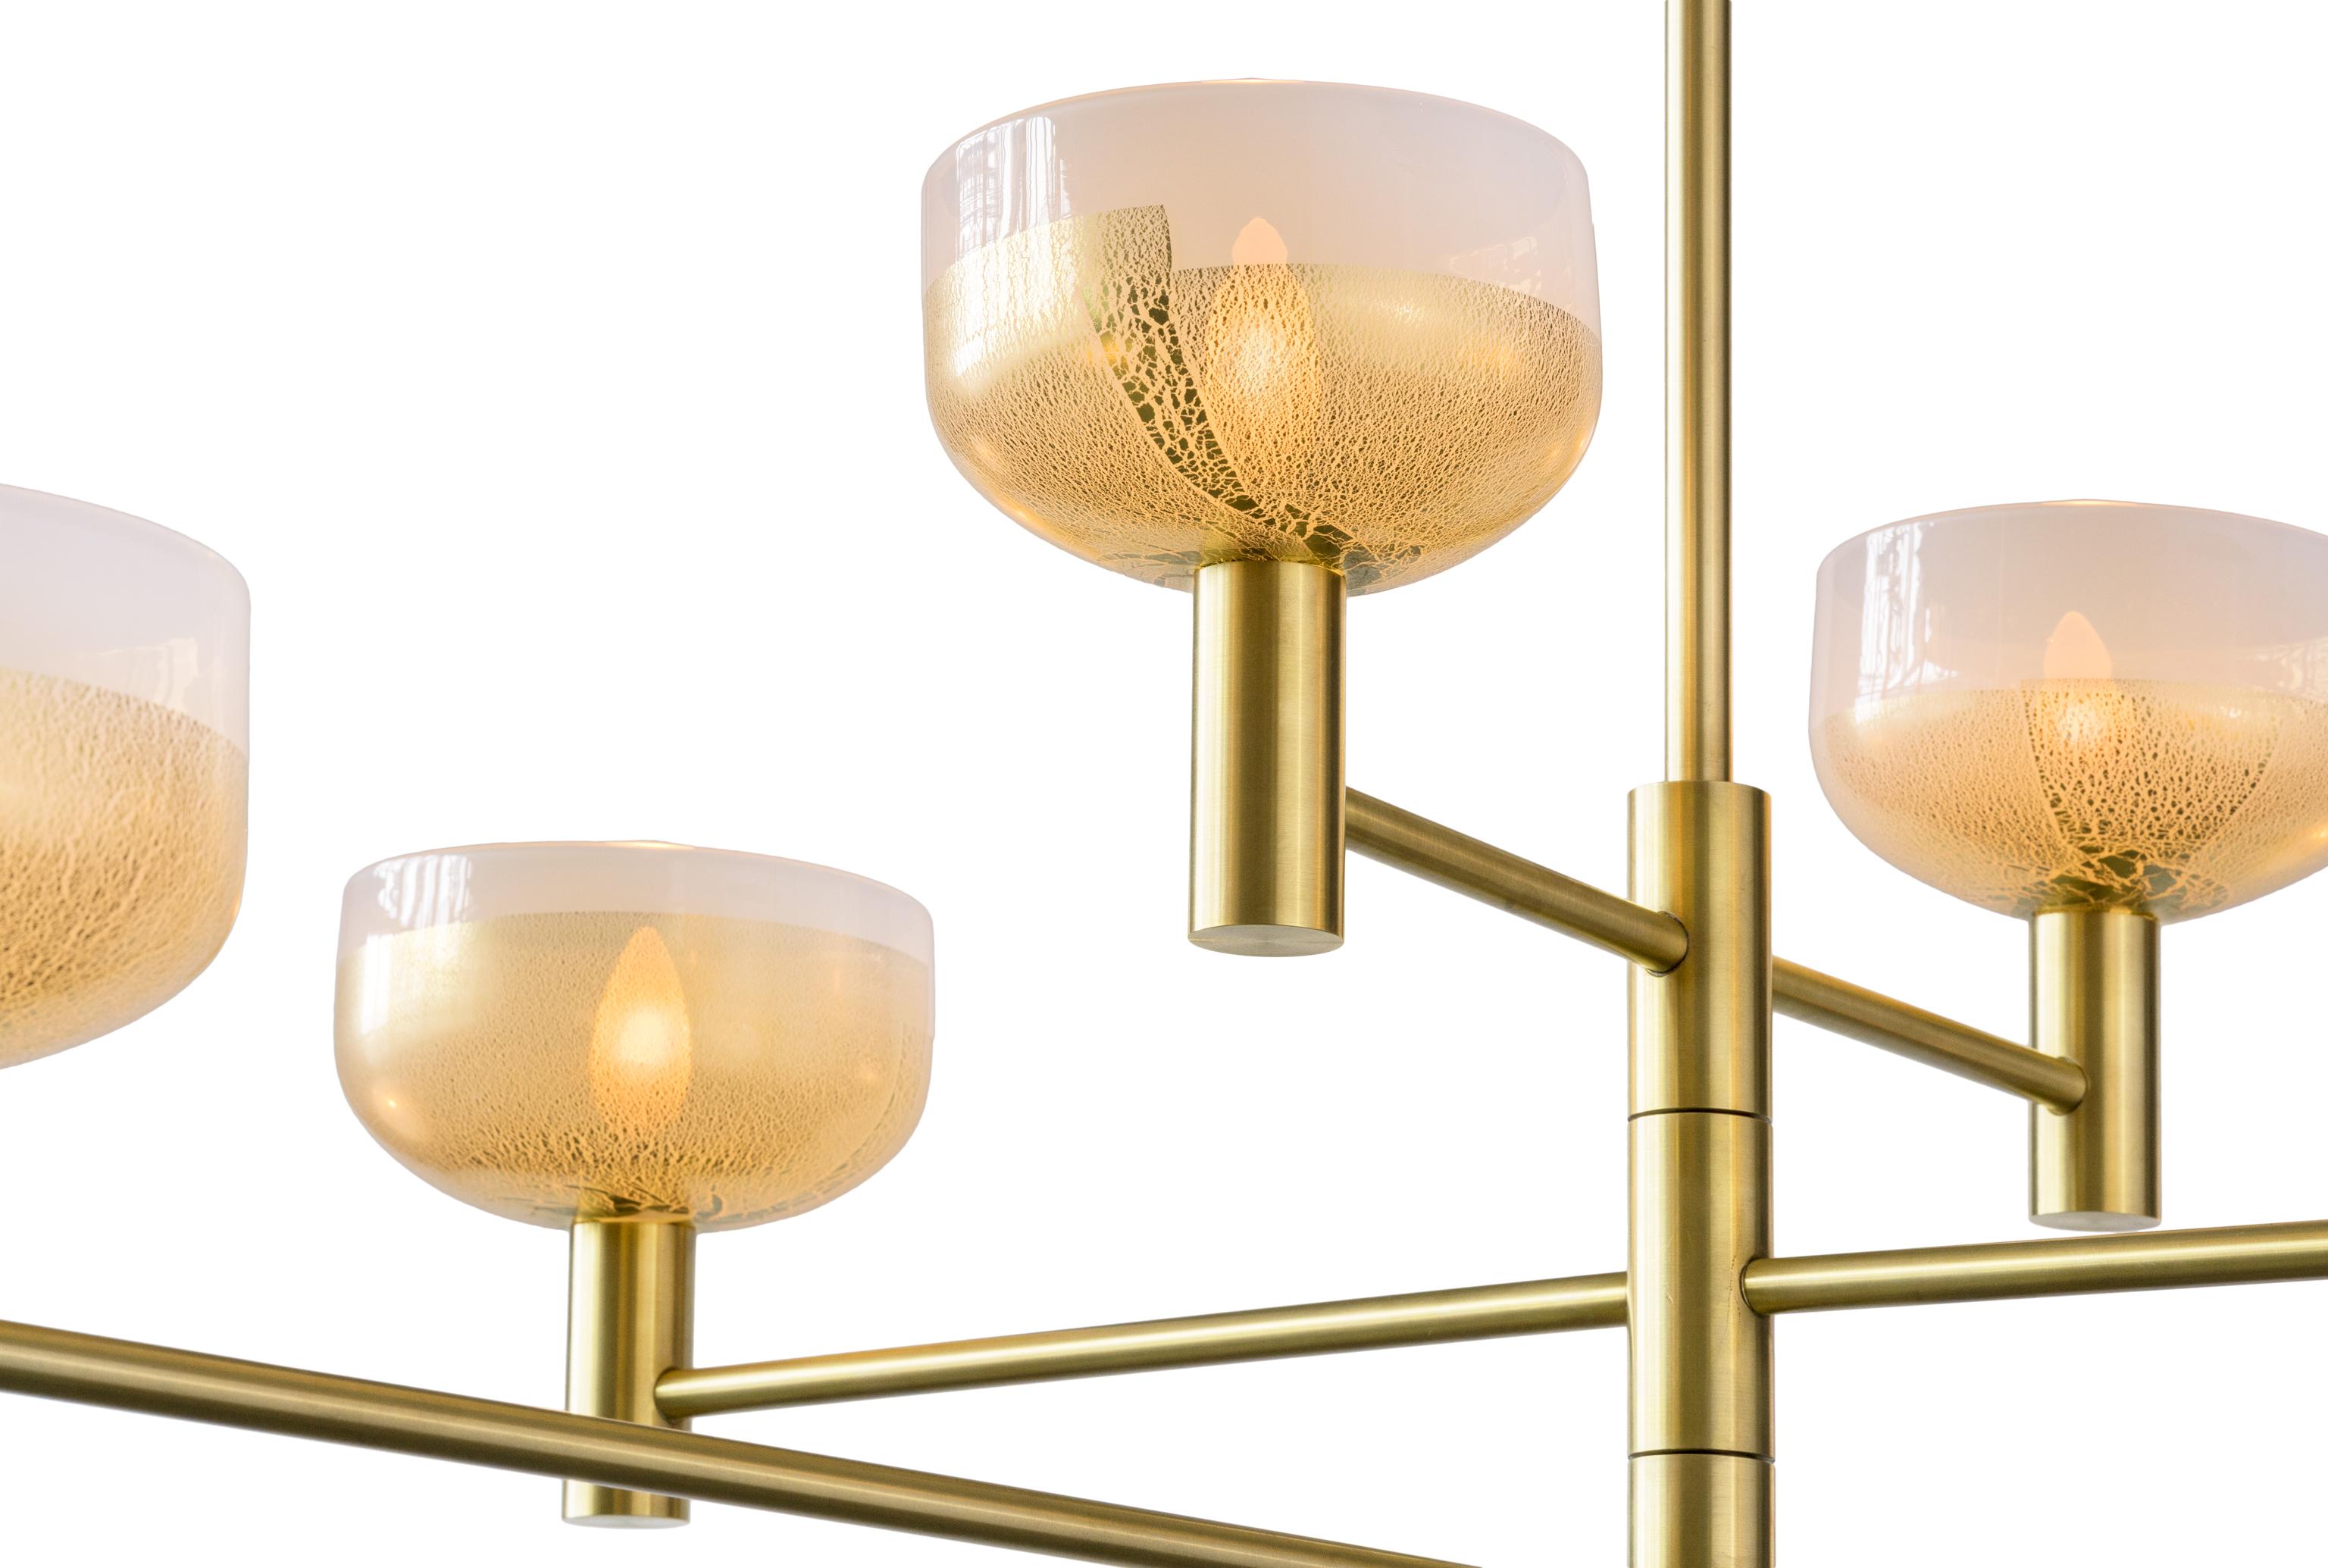 The Otto Luce chandelier was inspired by lighting fixtures found in Italy in the Mid-Century. This original and patented design is made to order with gilded blown glass and hand finished metal, creating a statement chandelier that carries on the